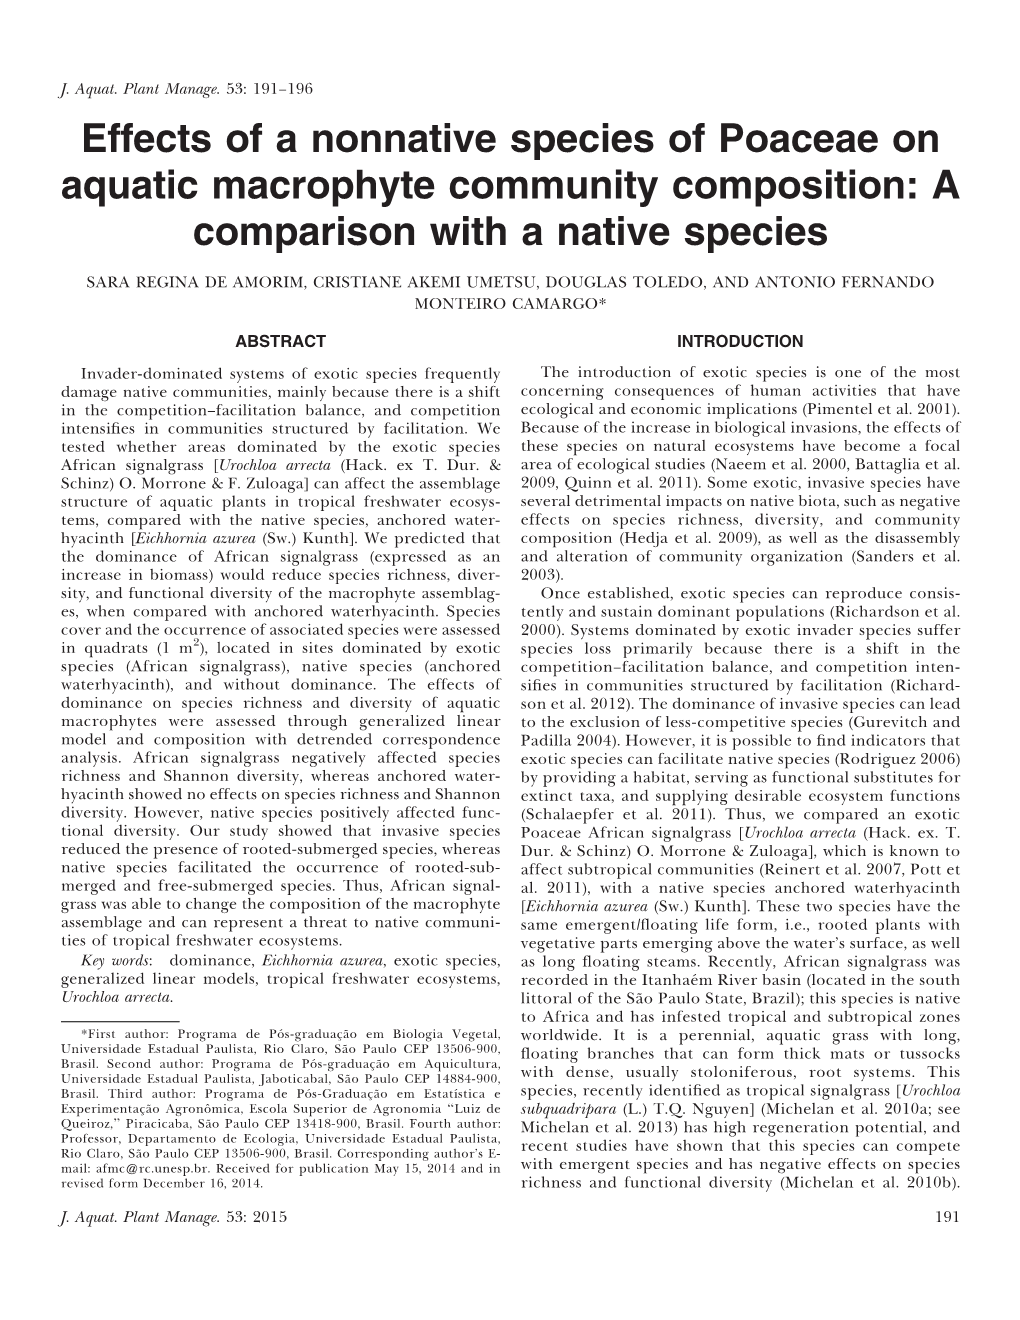 Effects of a Nonnative Species of Poaceae on Aquatic Macrophyte Community Composition: a Comparison with a Native Species